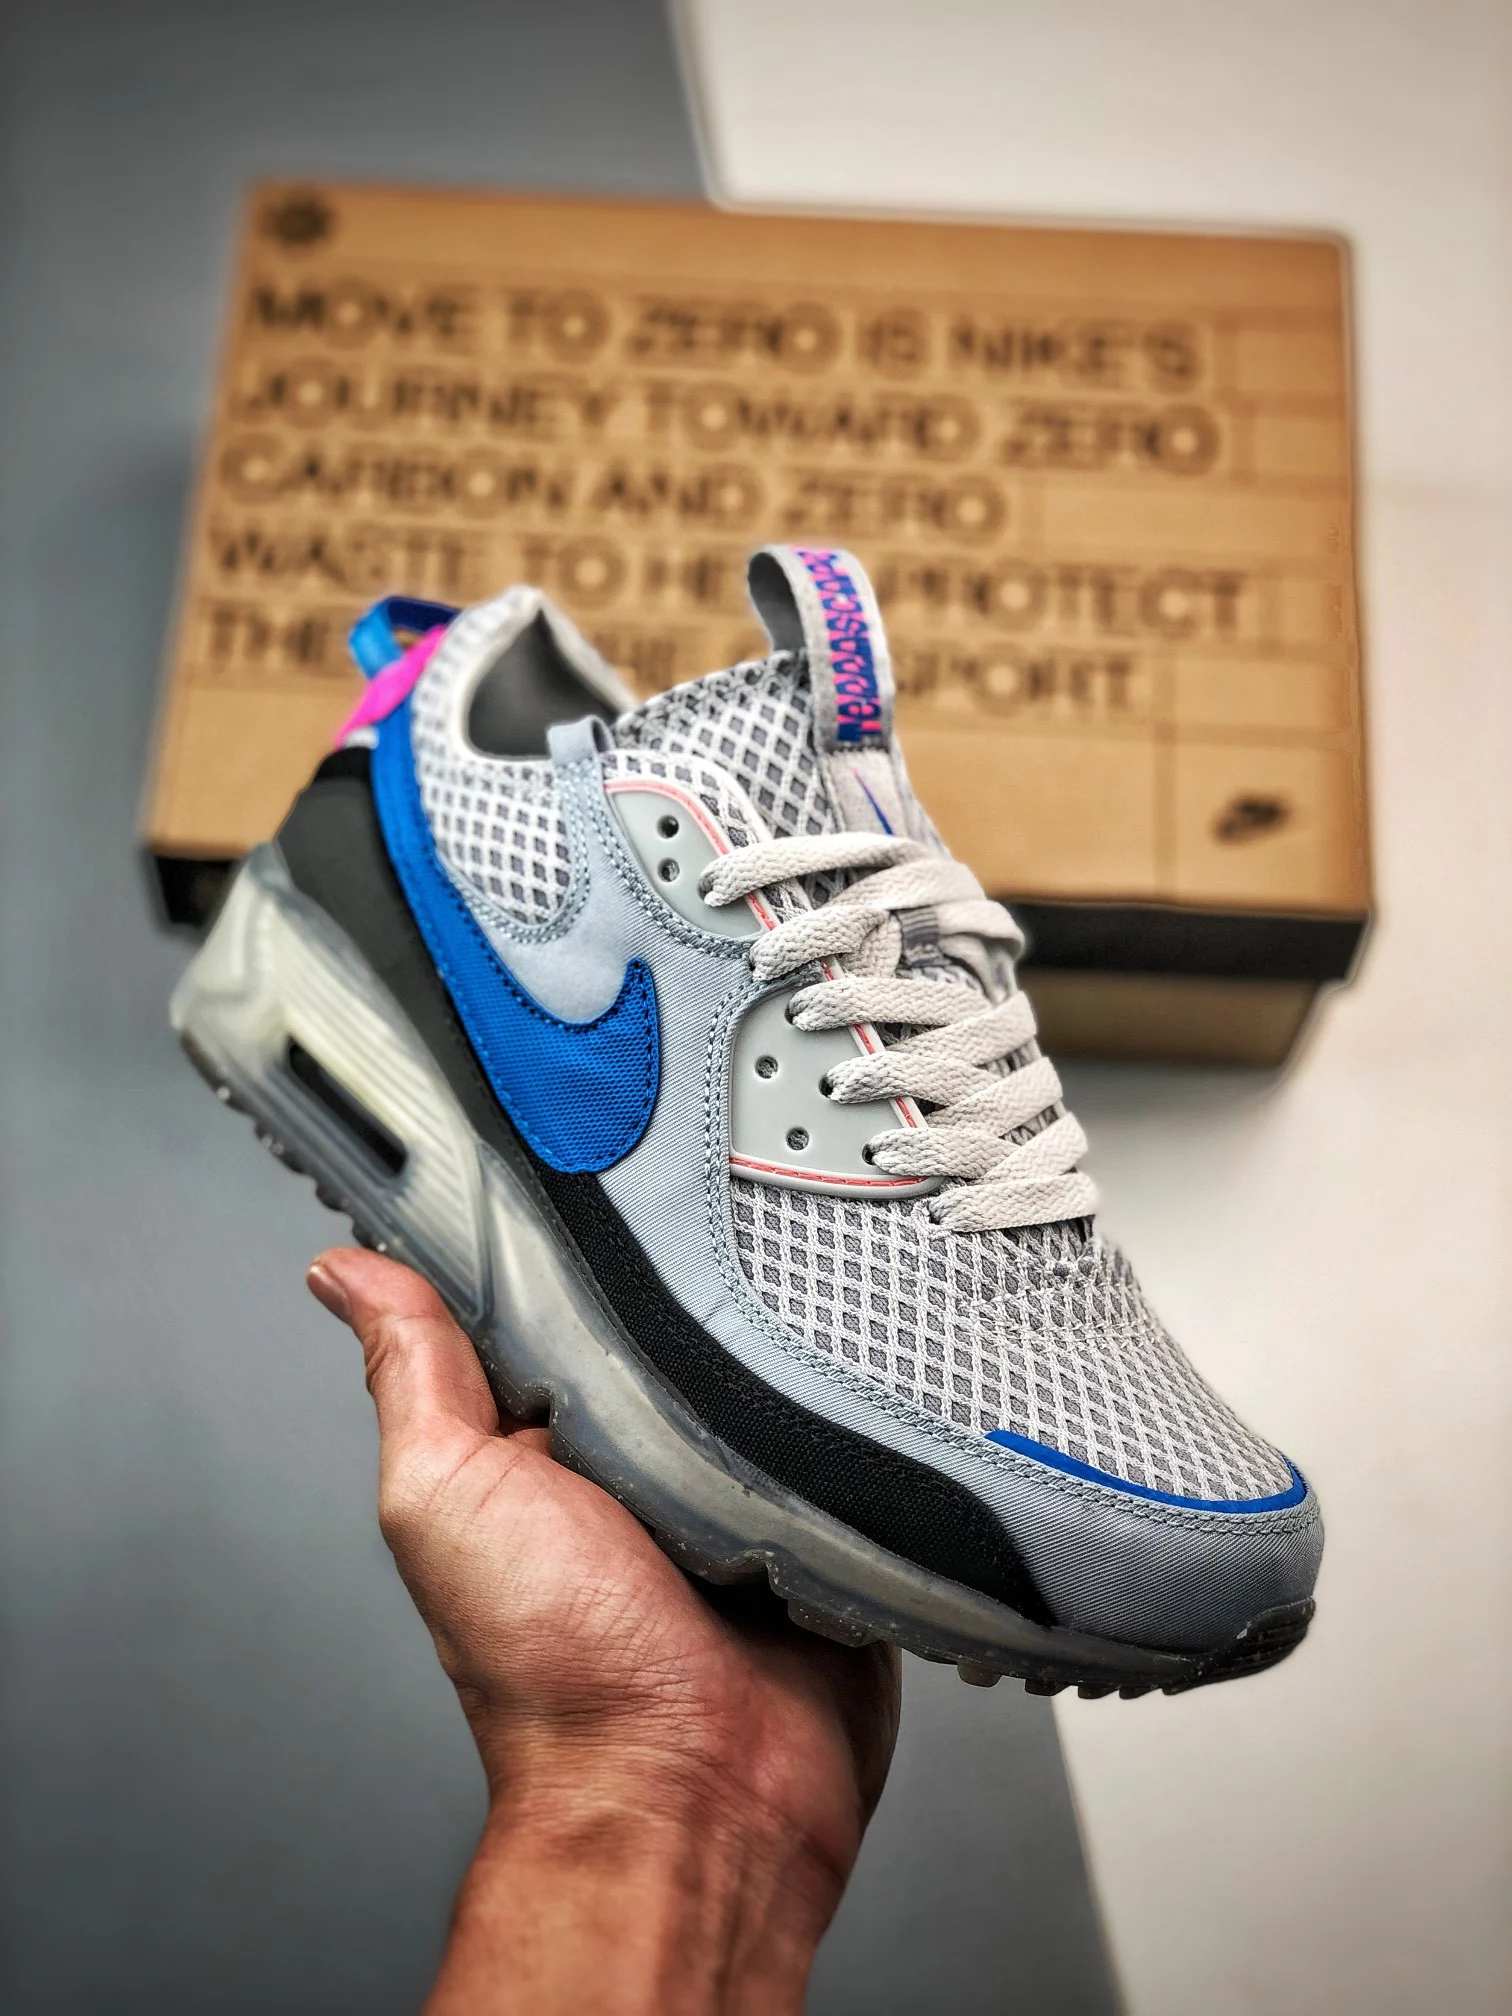 Nike Air Max 90 Terrascape Grey Blue Pink DM0033-004 For Sale